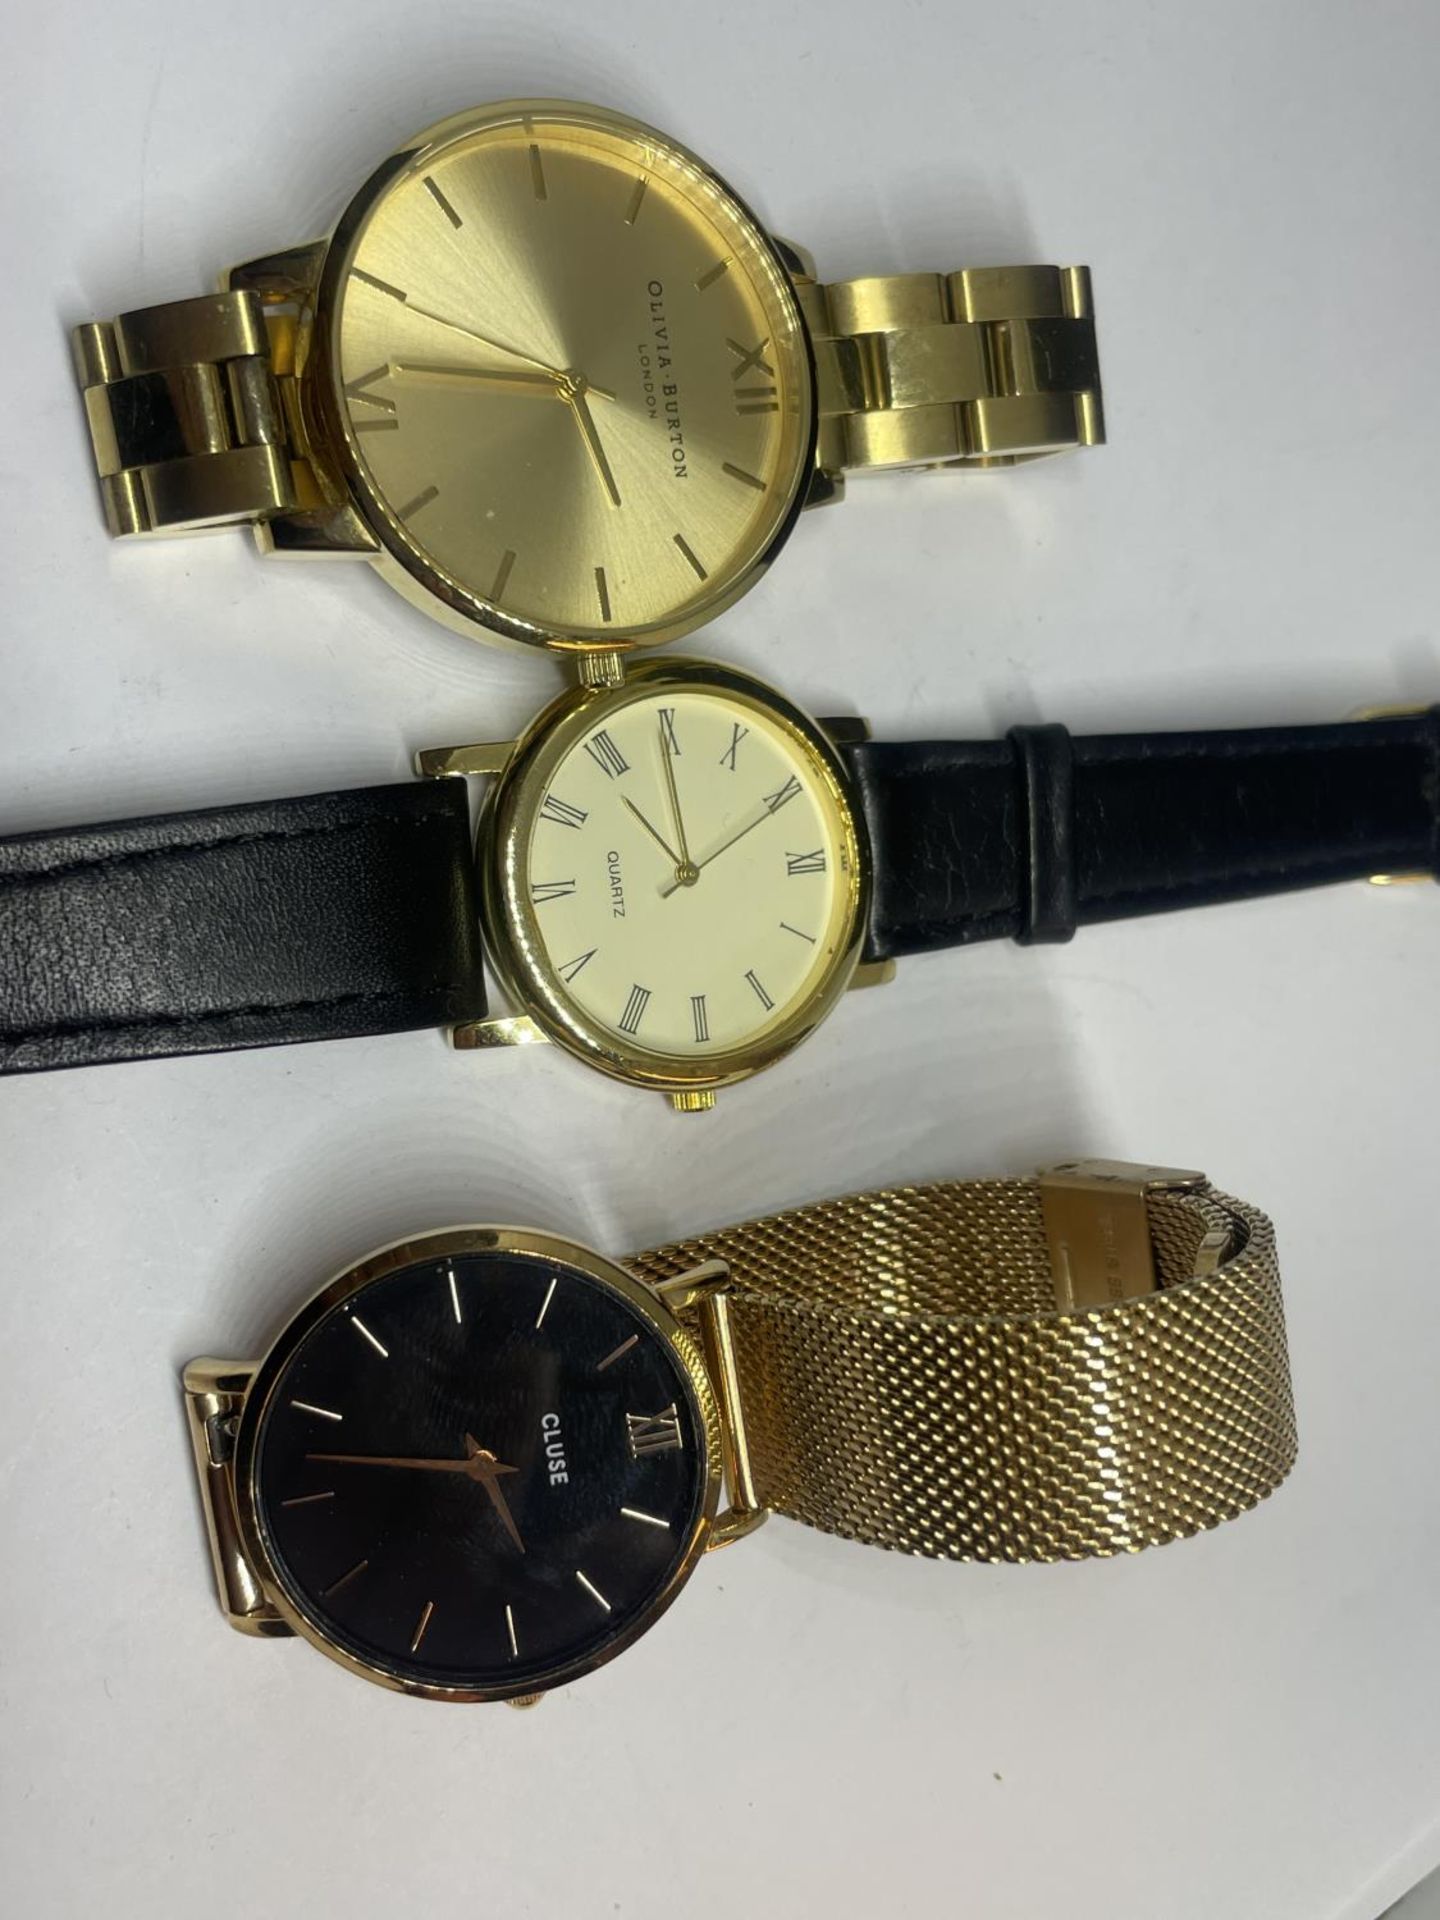 THREE WRIST WATCHES SEEN WORKING BUT NO WARRANTY - Image 2 of 2